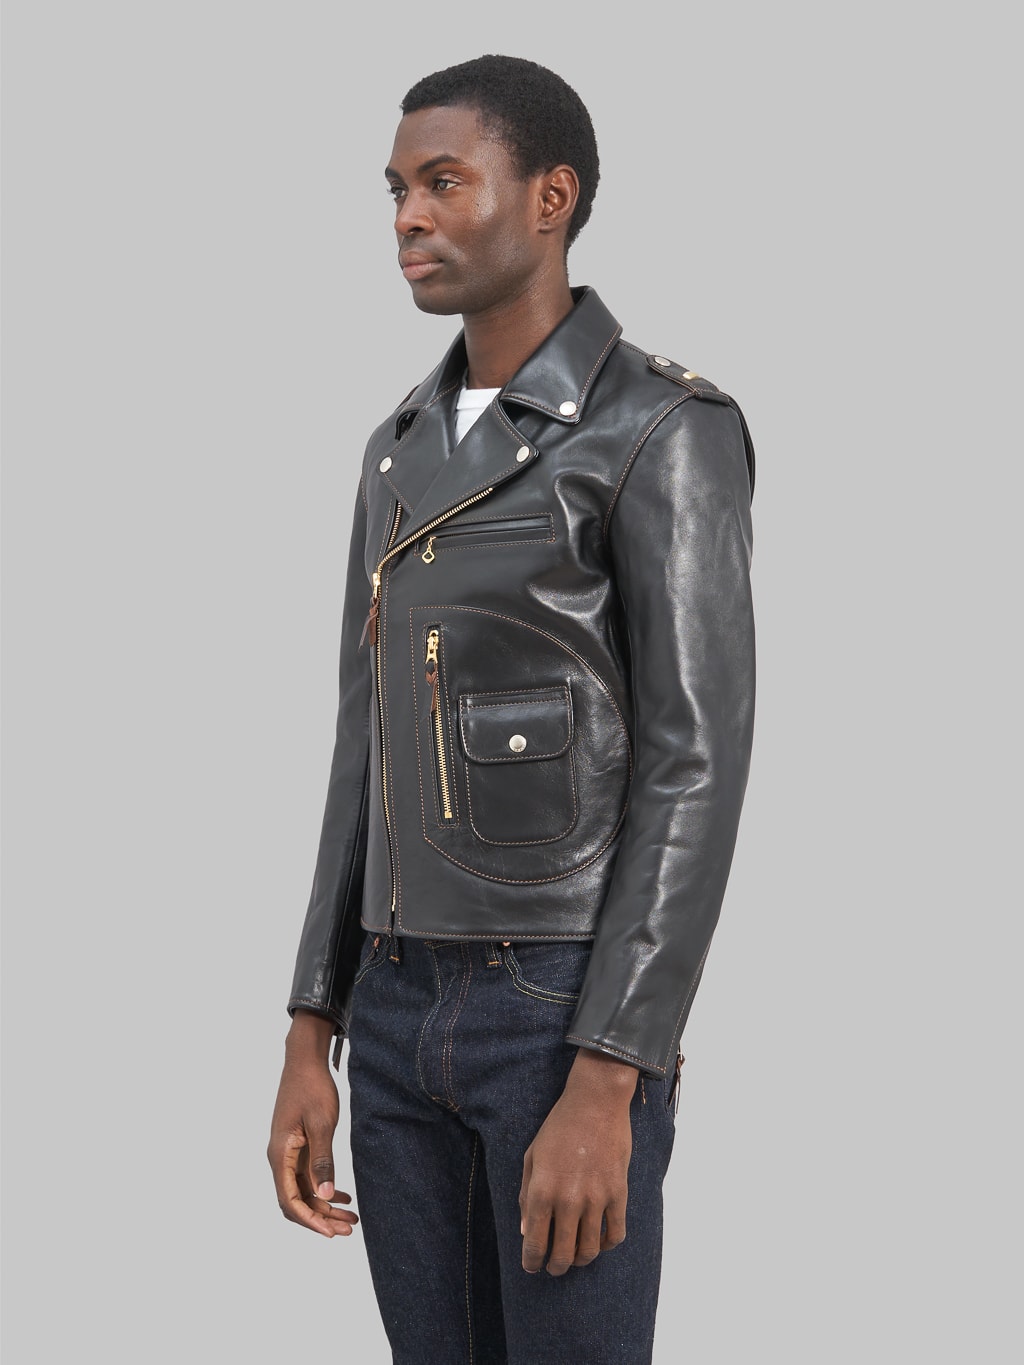 The Flat Head Horsehide leather double Riders Jacket Black Semi Aniline side